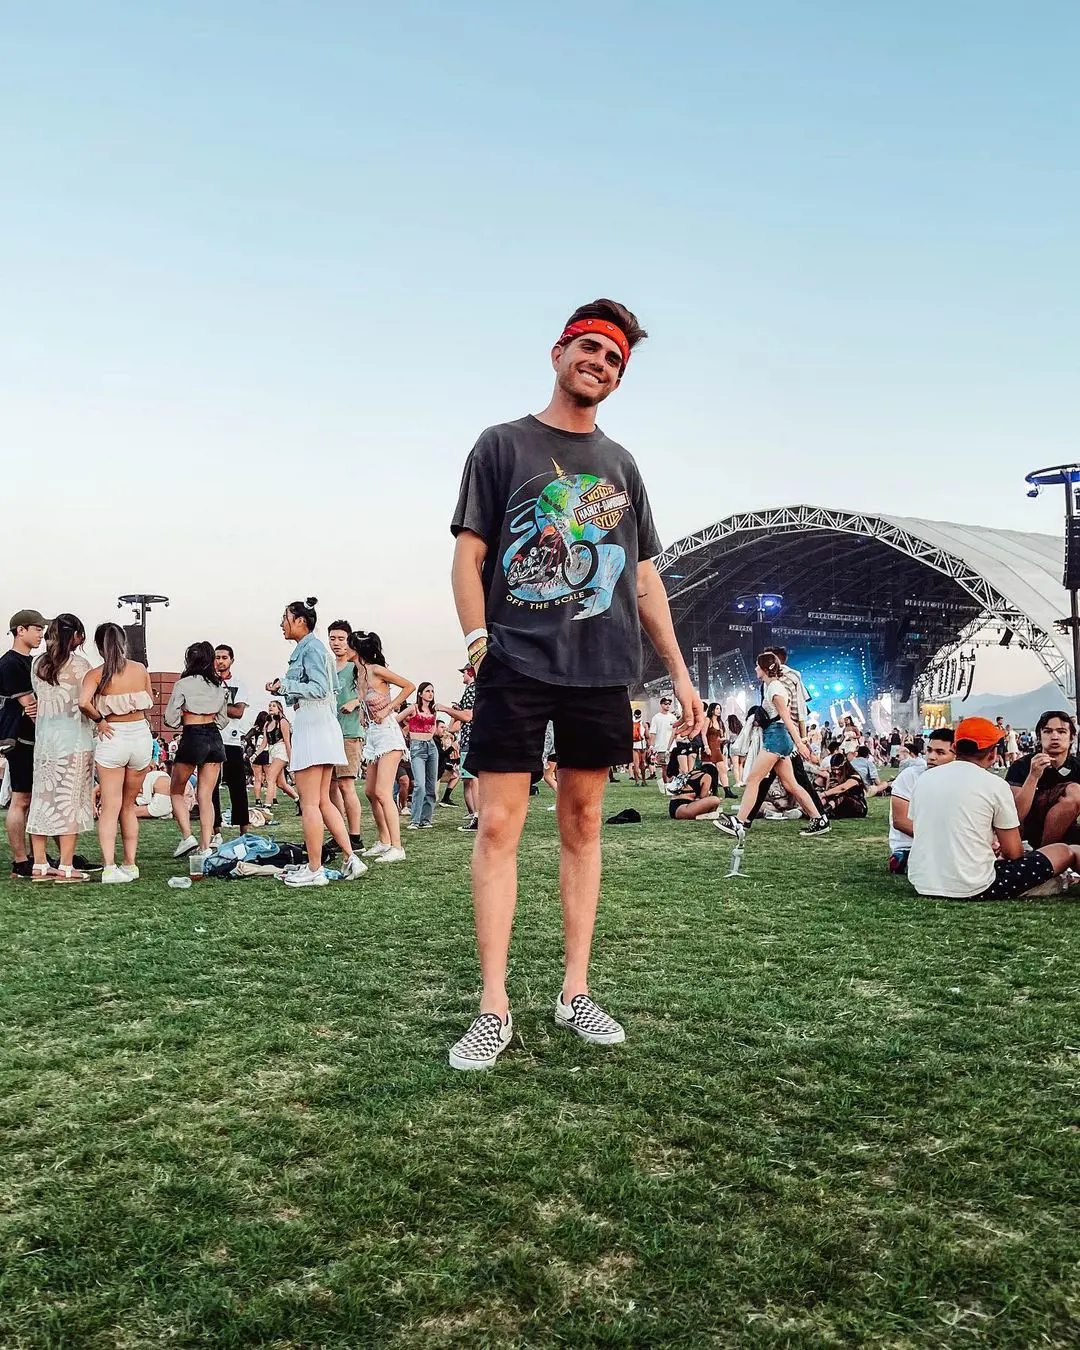 Kostas attended the Coachella Valley Music and Arts Festival on 20 April 2022